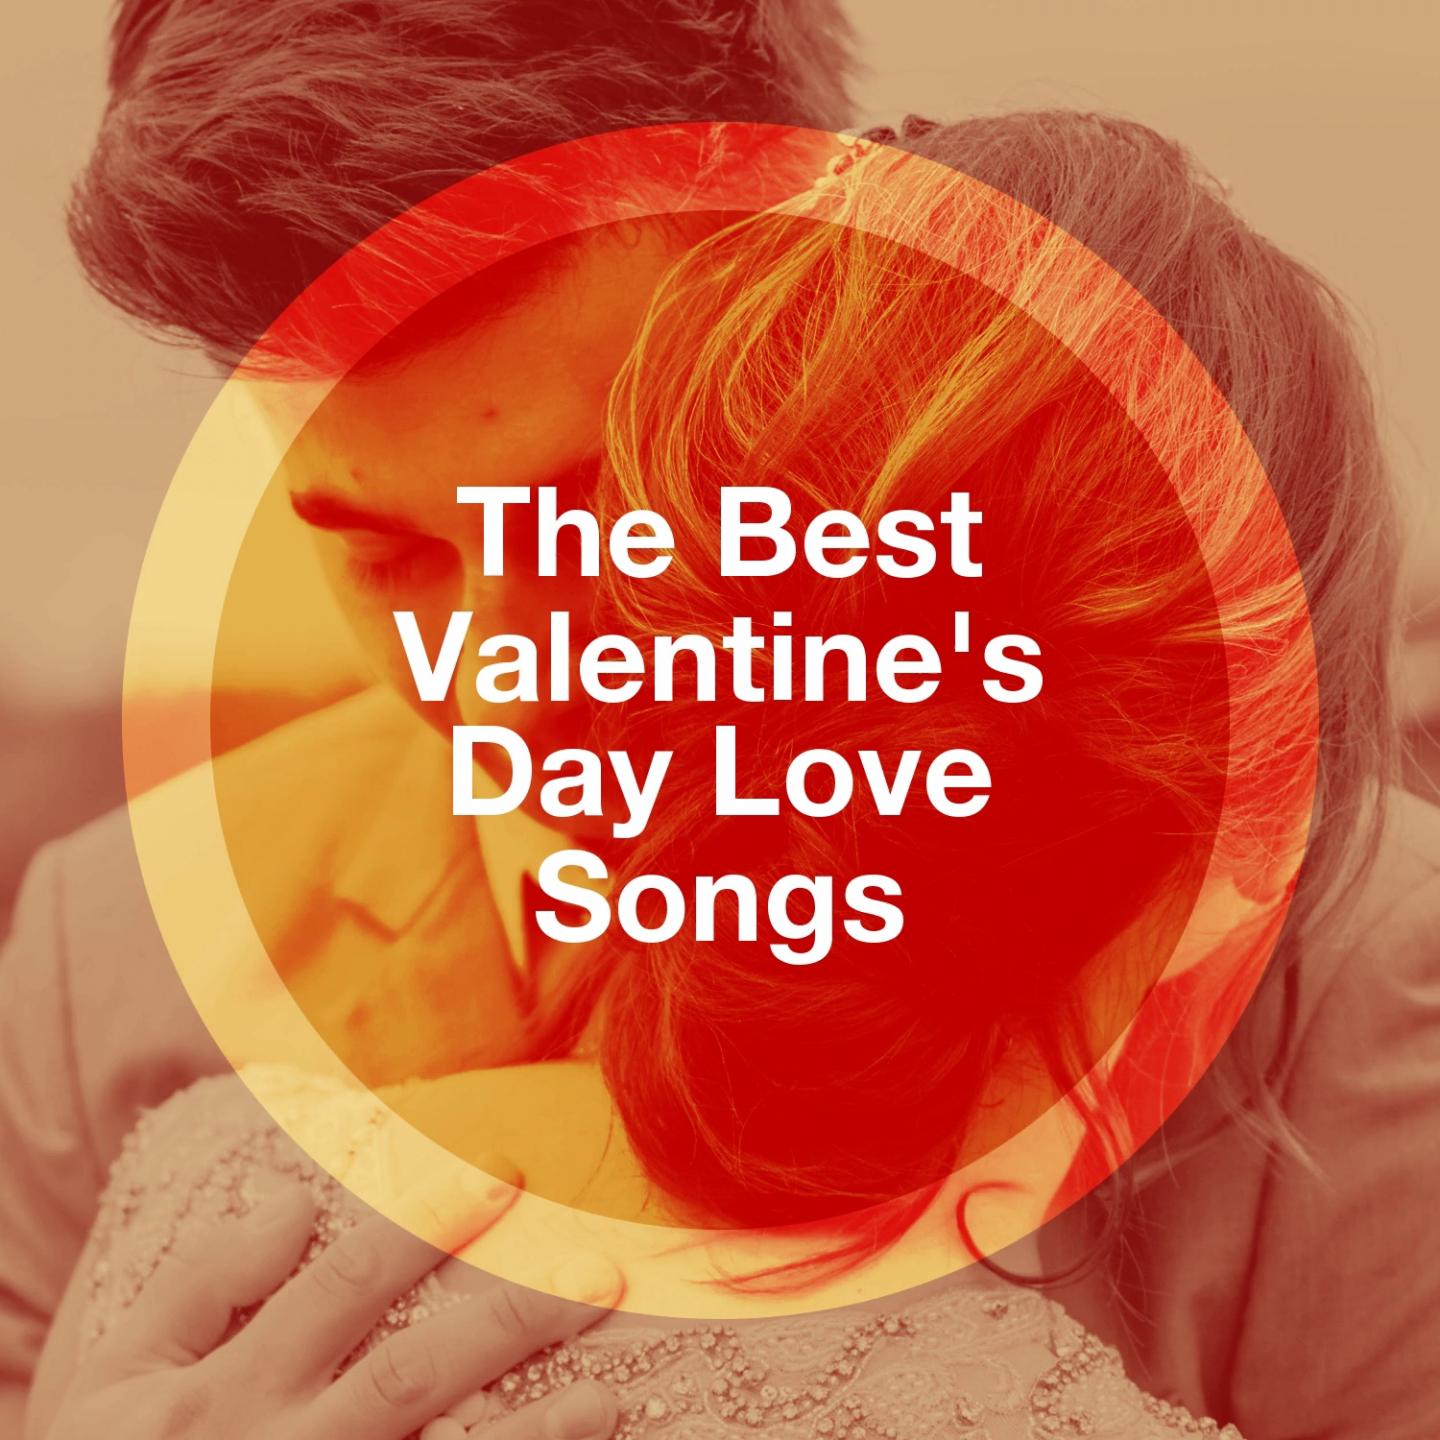 The Best Valentine's Day Love Songs